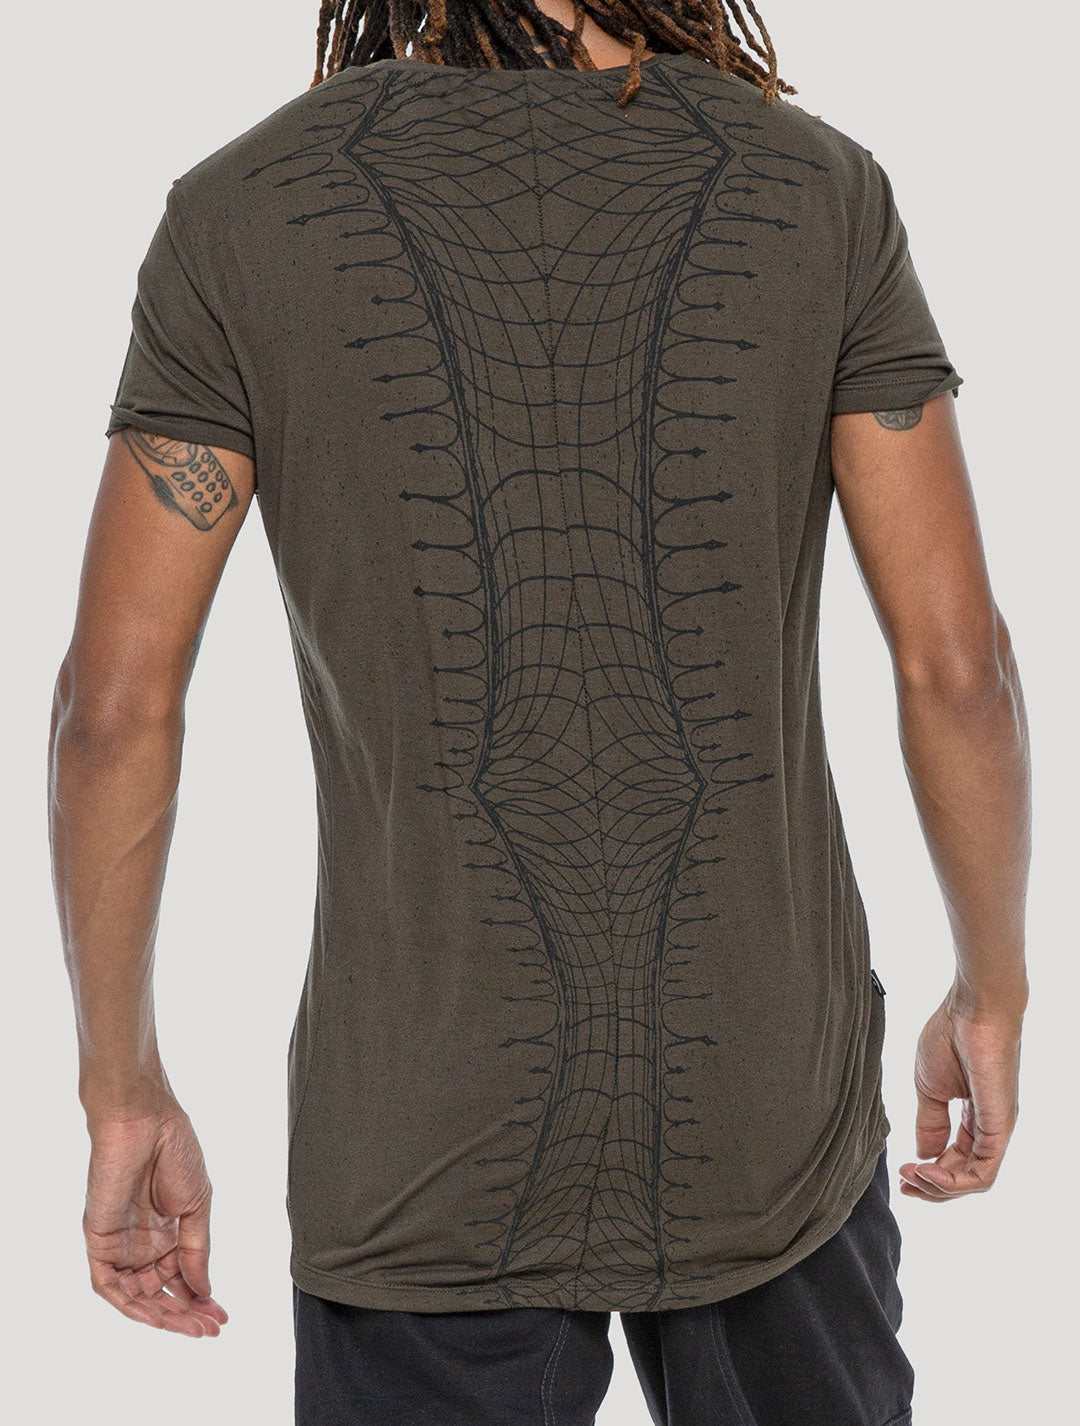 Olive green 'Vortex' 100% Bamboo Printed T-shirt by Psylo Fashion